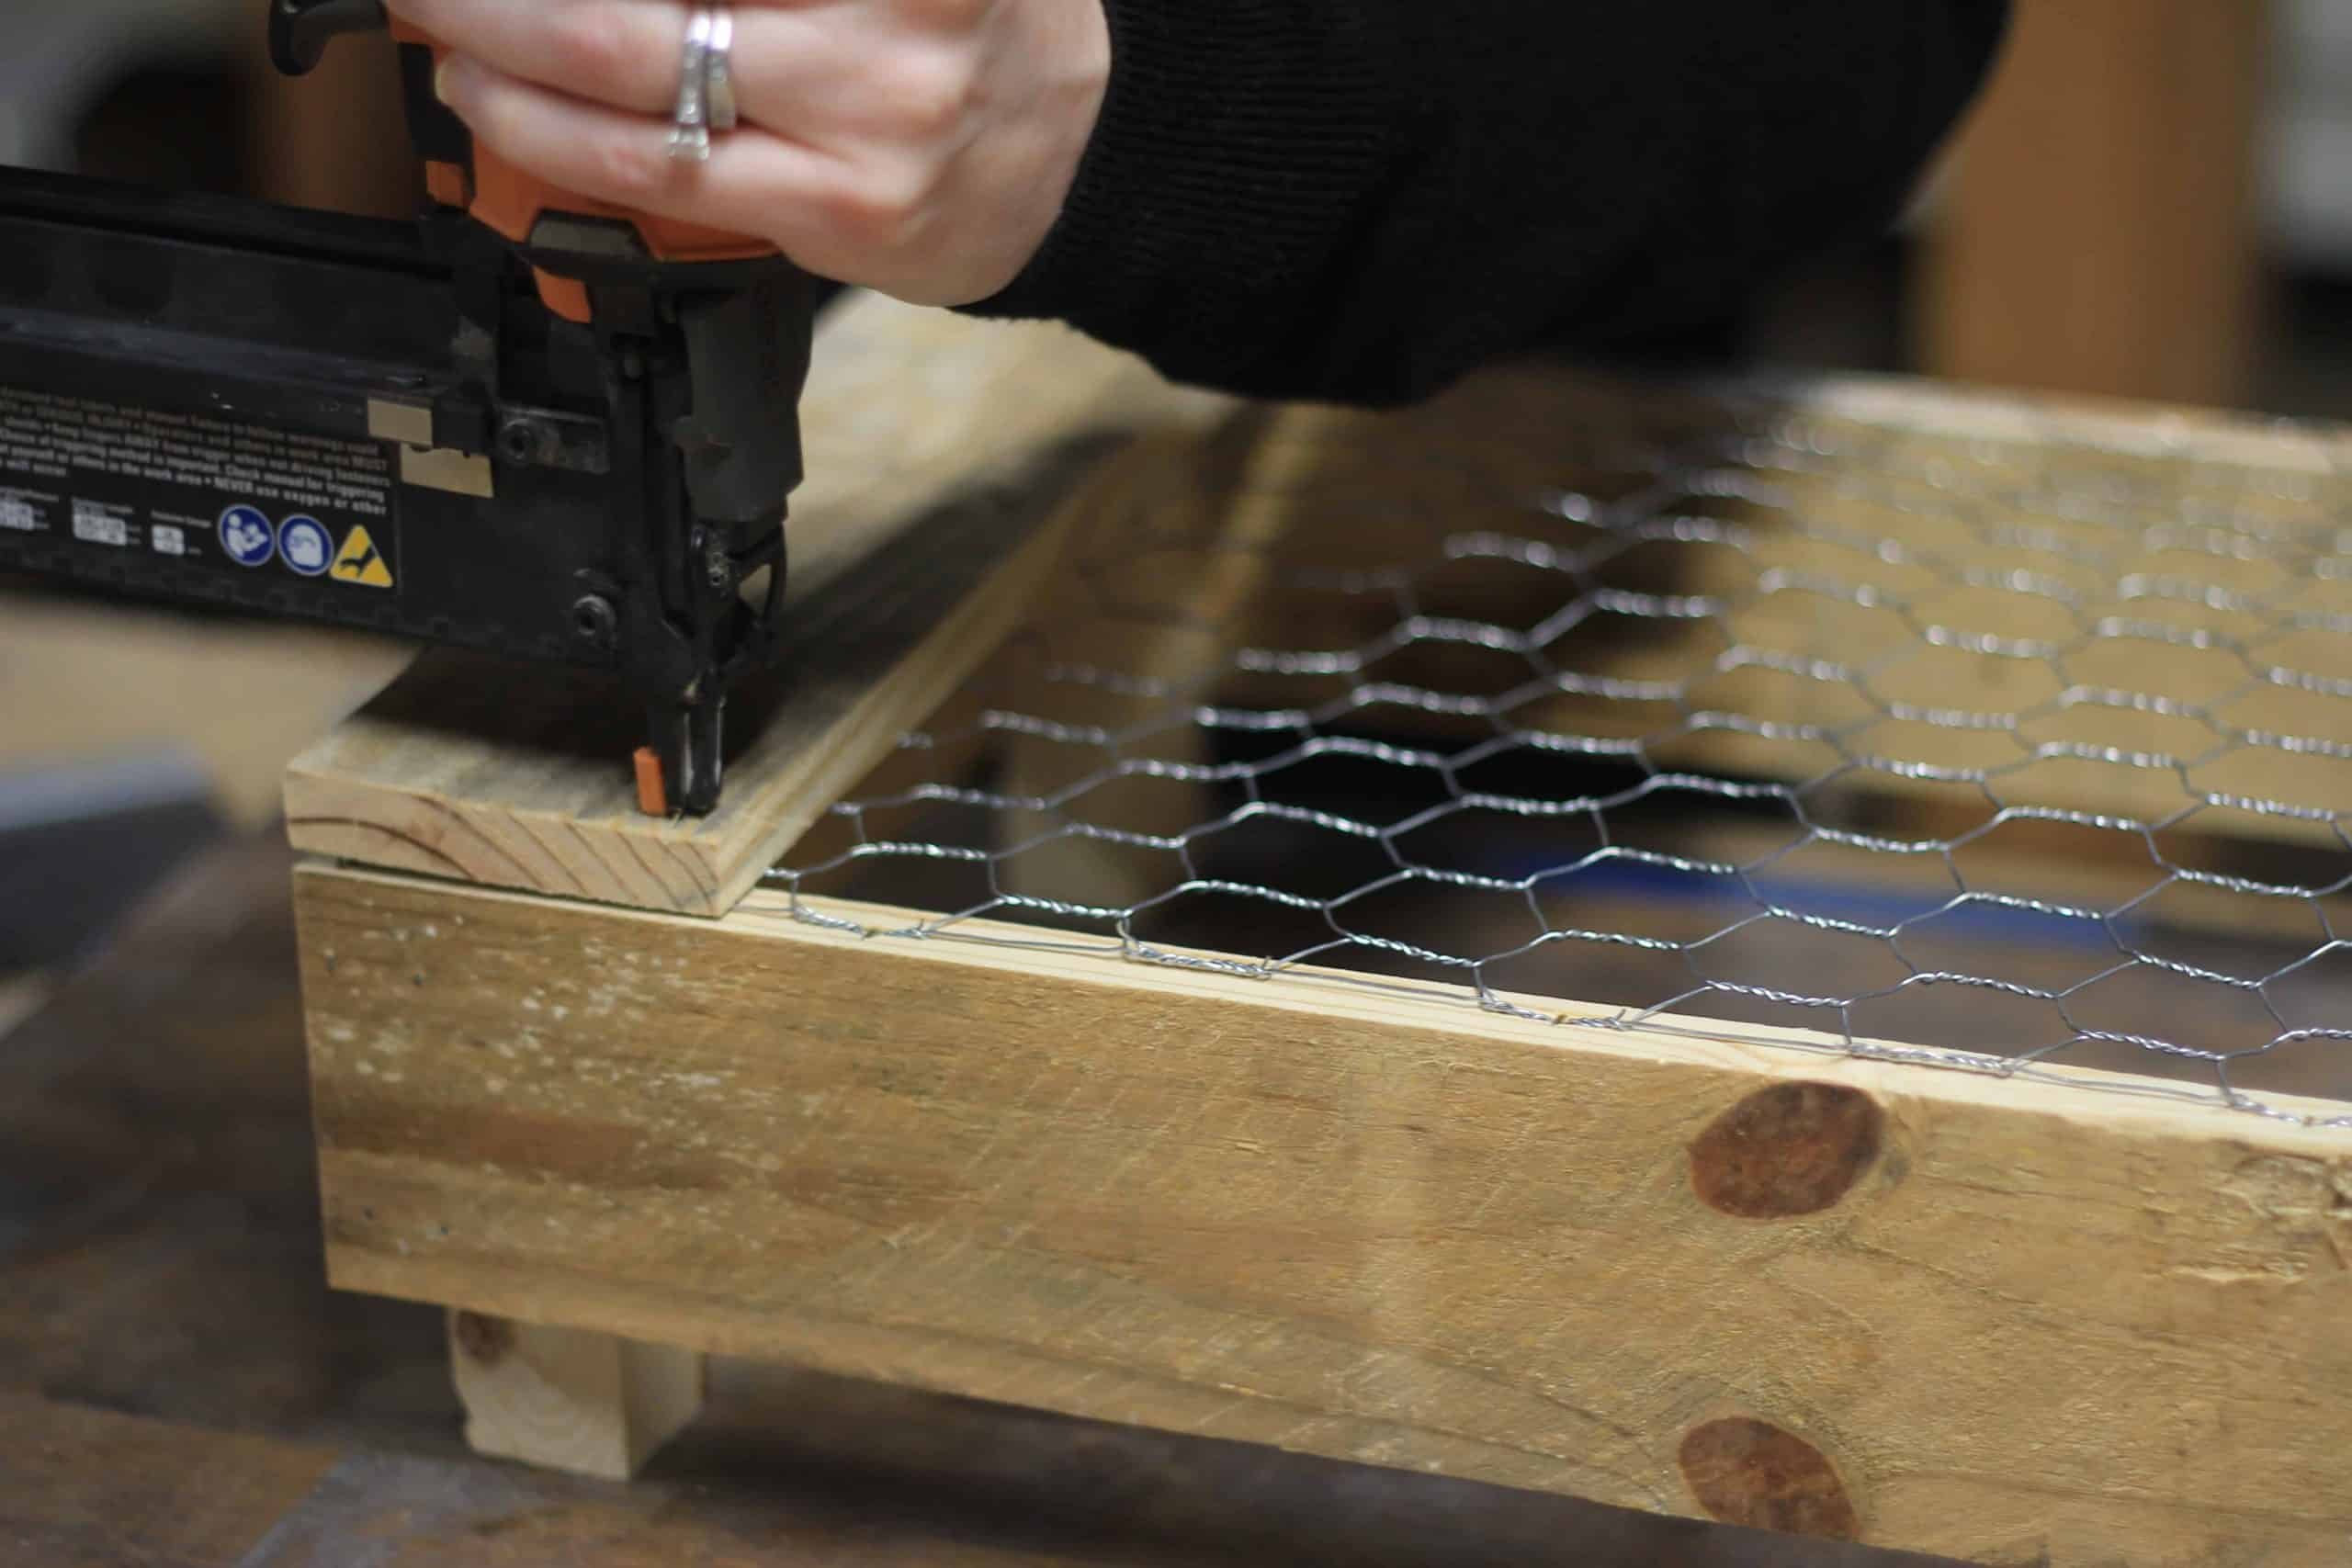 Once the chicken wire is secured with staples you can ad the bottom supports with a brad nailer to finish up the base of the DIY pallet crate